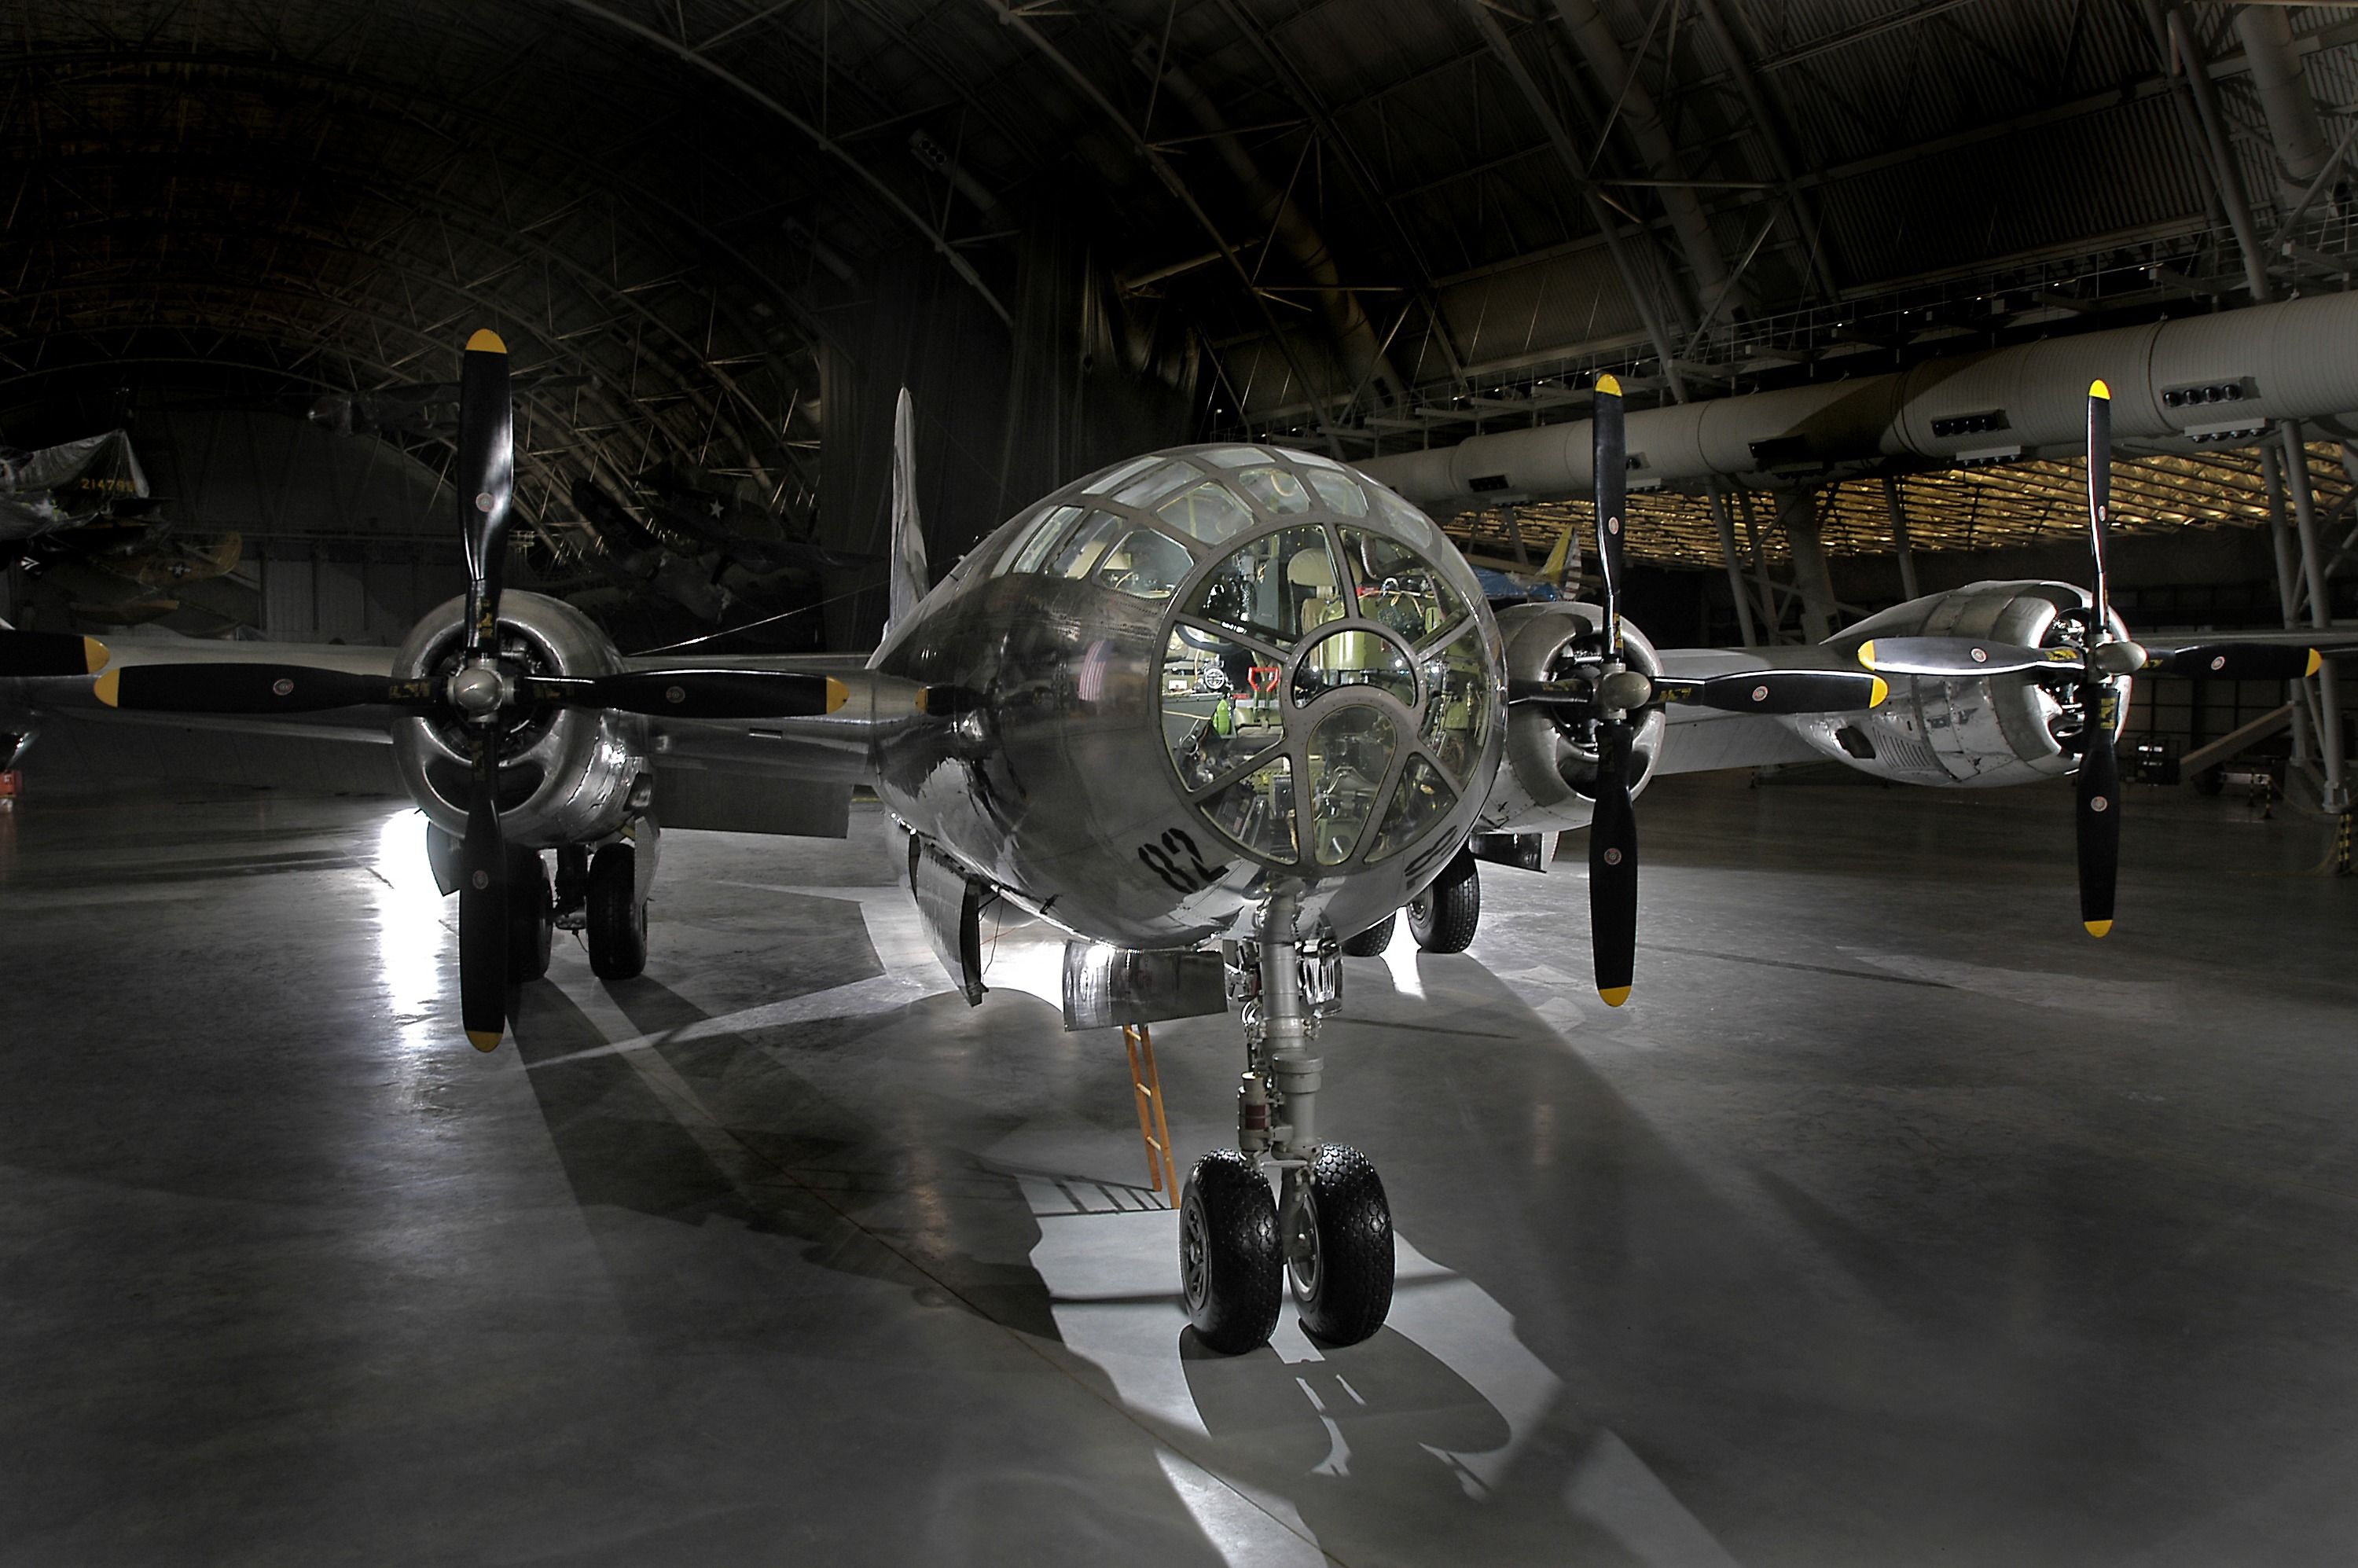 The Boeing B-29 Superfortress Enola Gay on display in a museum.